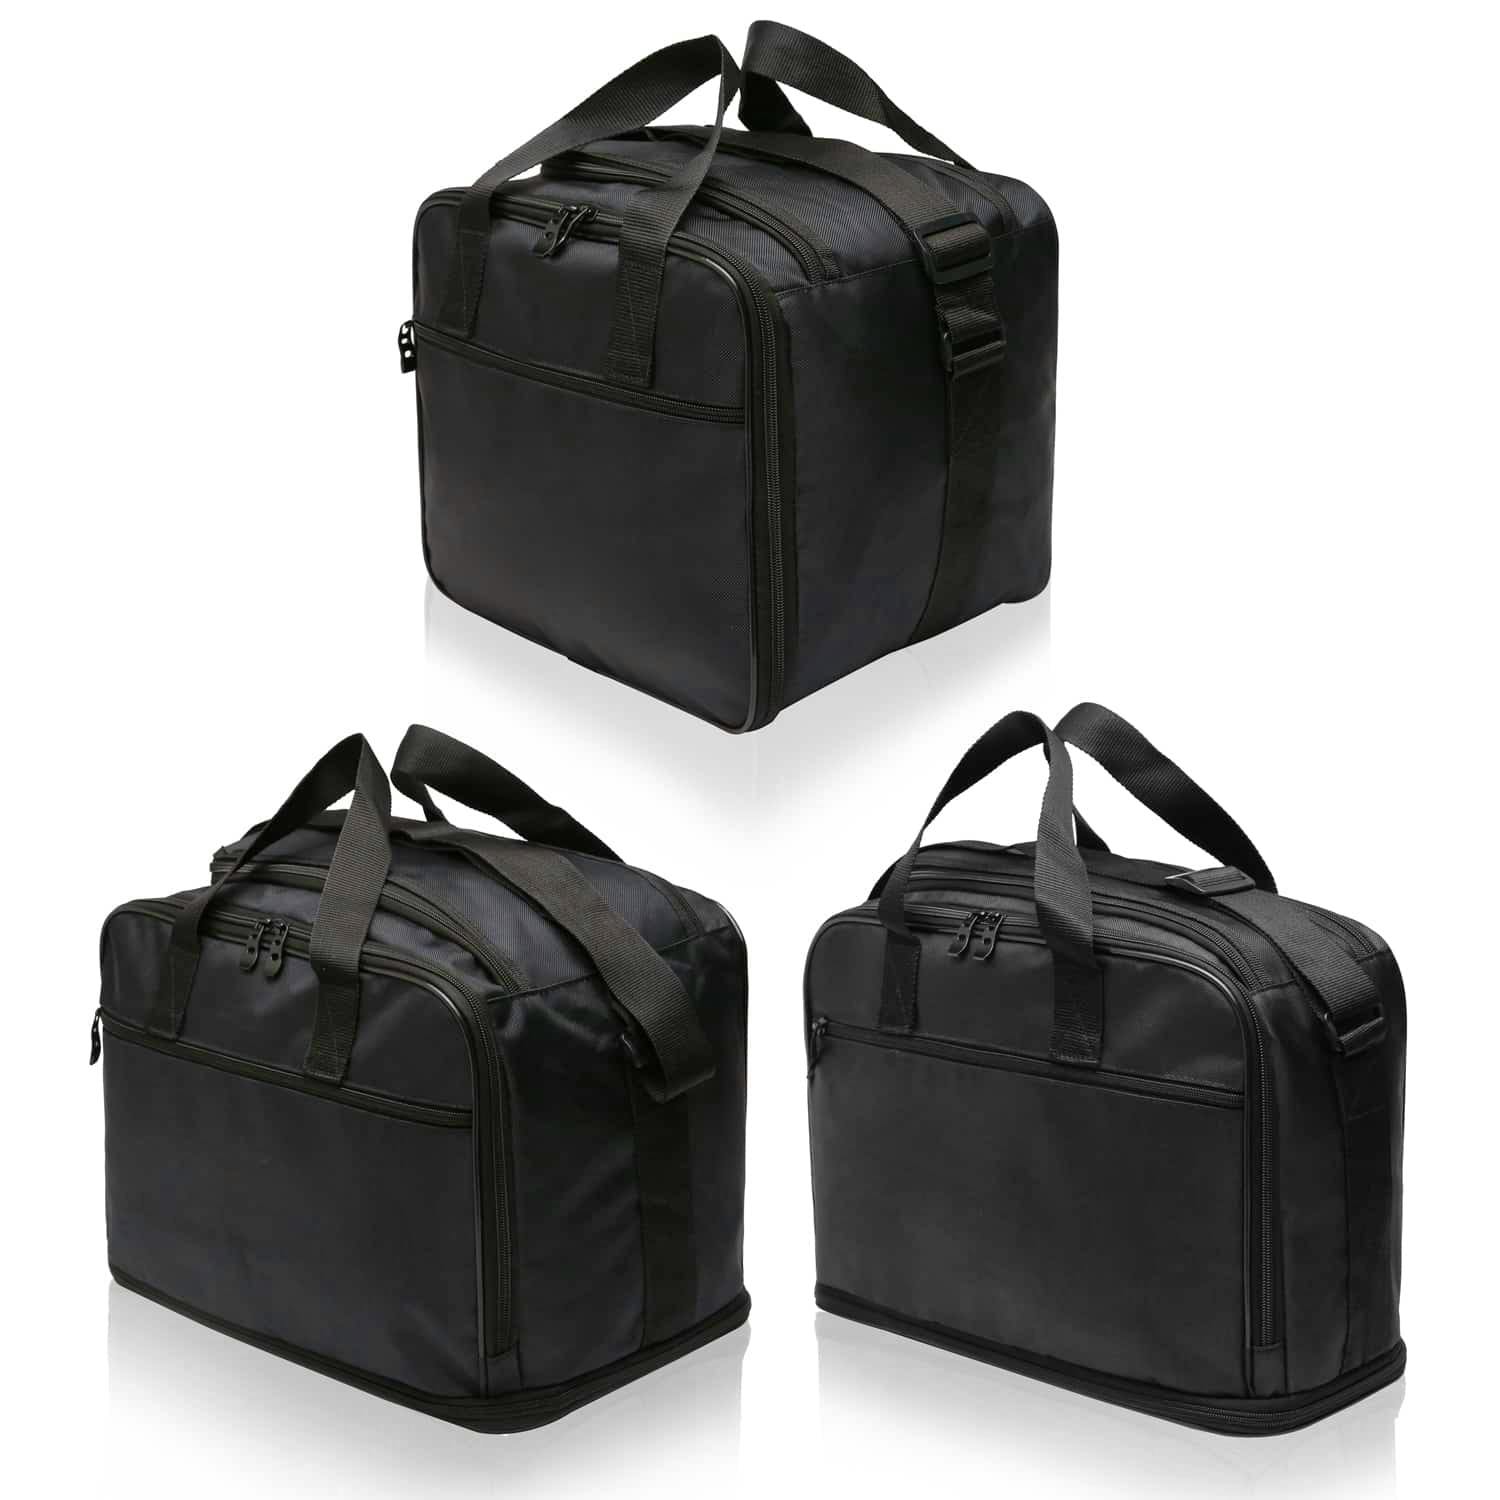 Picture 1 of Inner bags for panniers and topcase alluminium BMW GS R1250, R1200, F850, F750